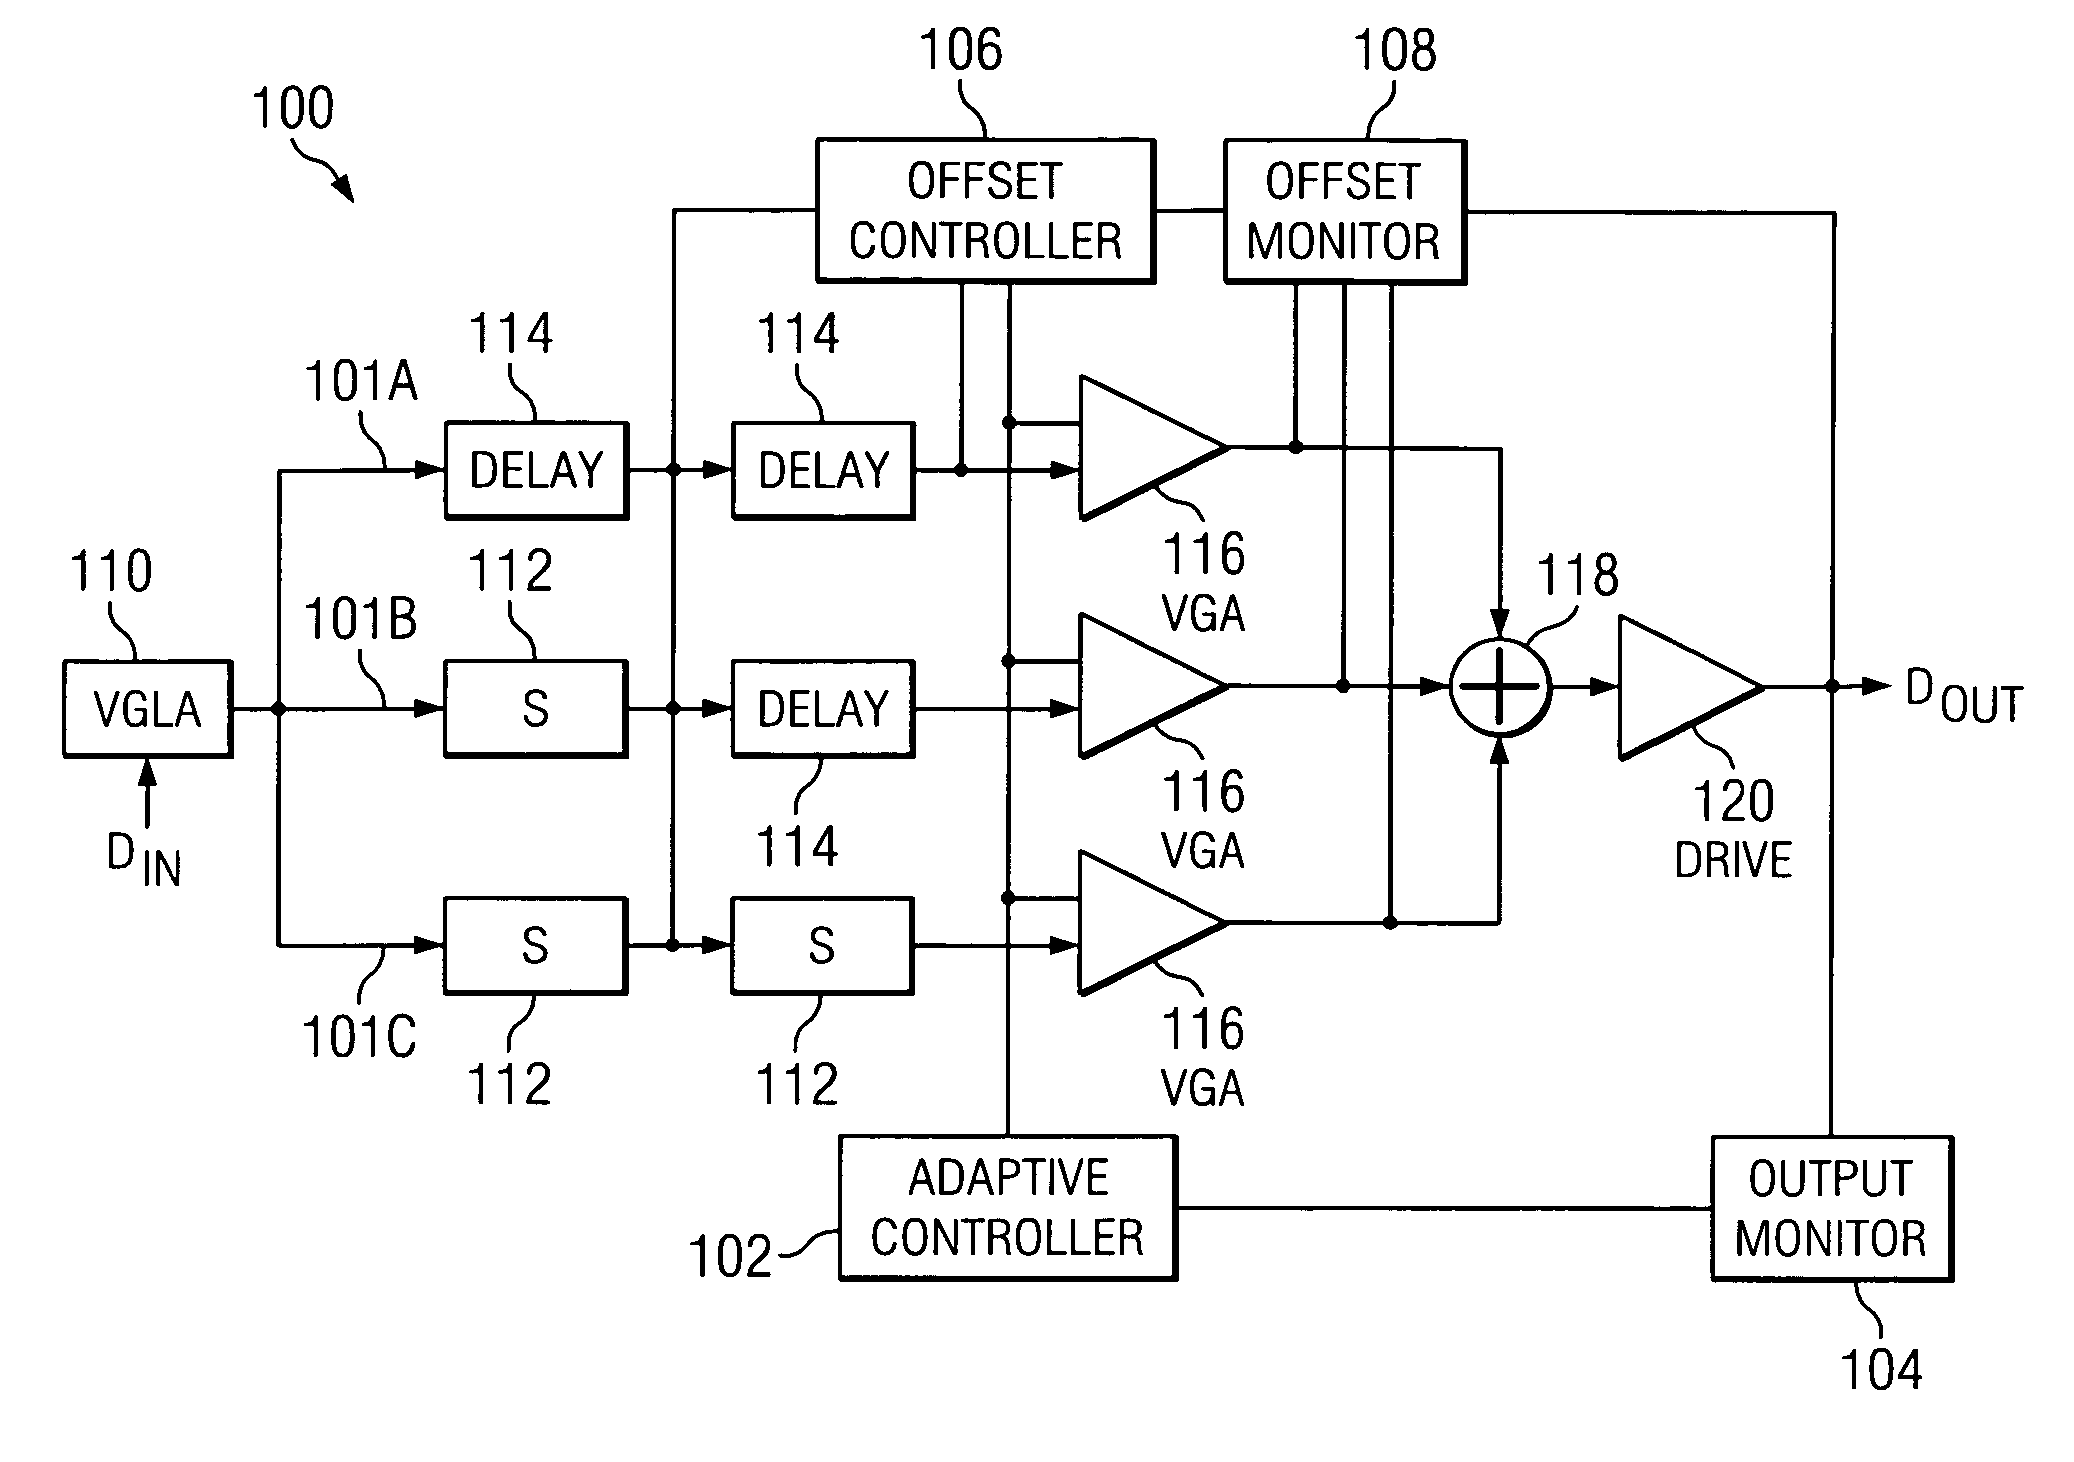 Correcting DC offsets in a multi-stage amplifier